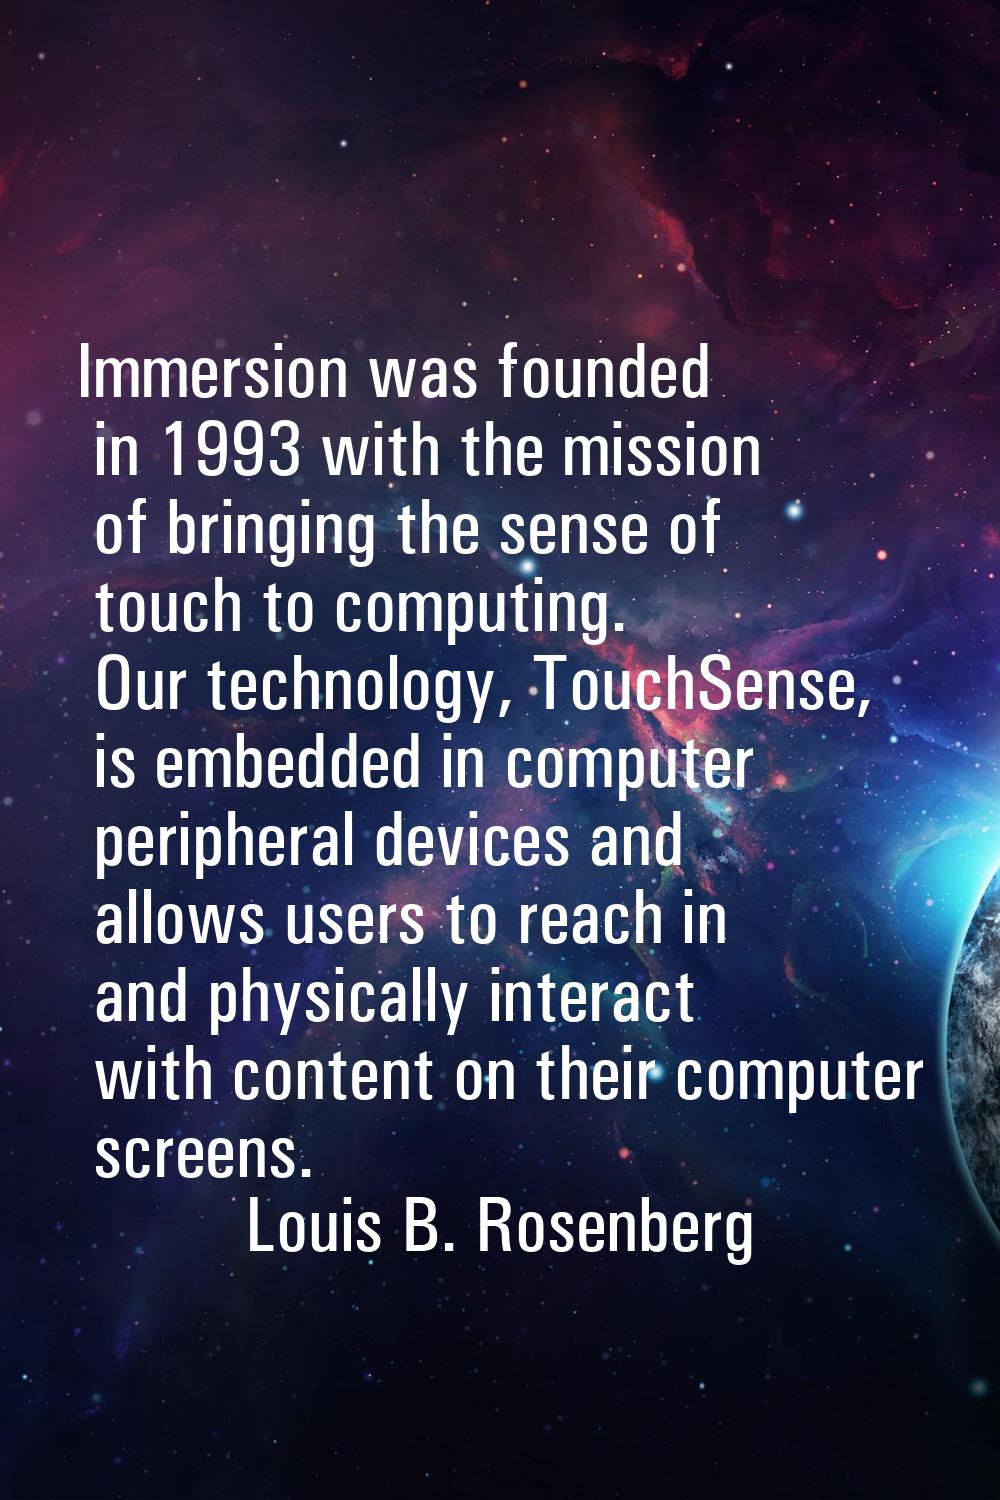 Immersion was founded in 1993 with the mission of bringing the sense of touch to computing. Our tec